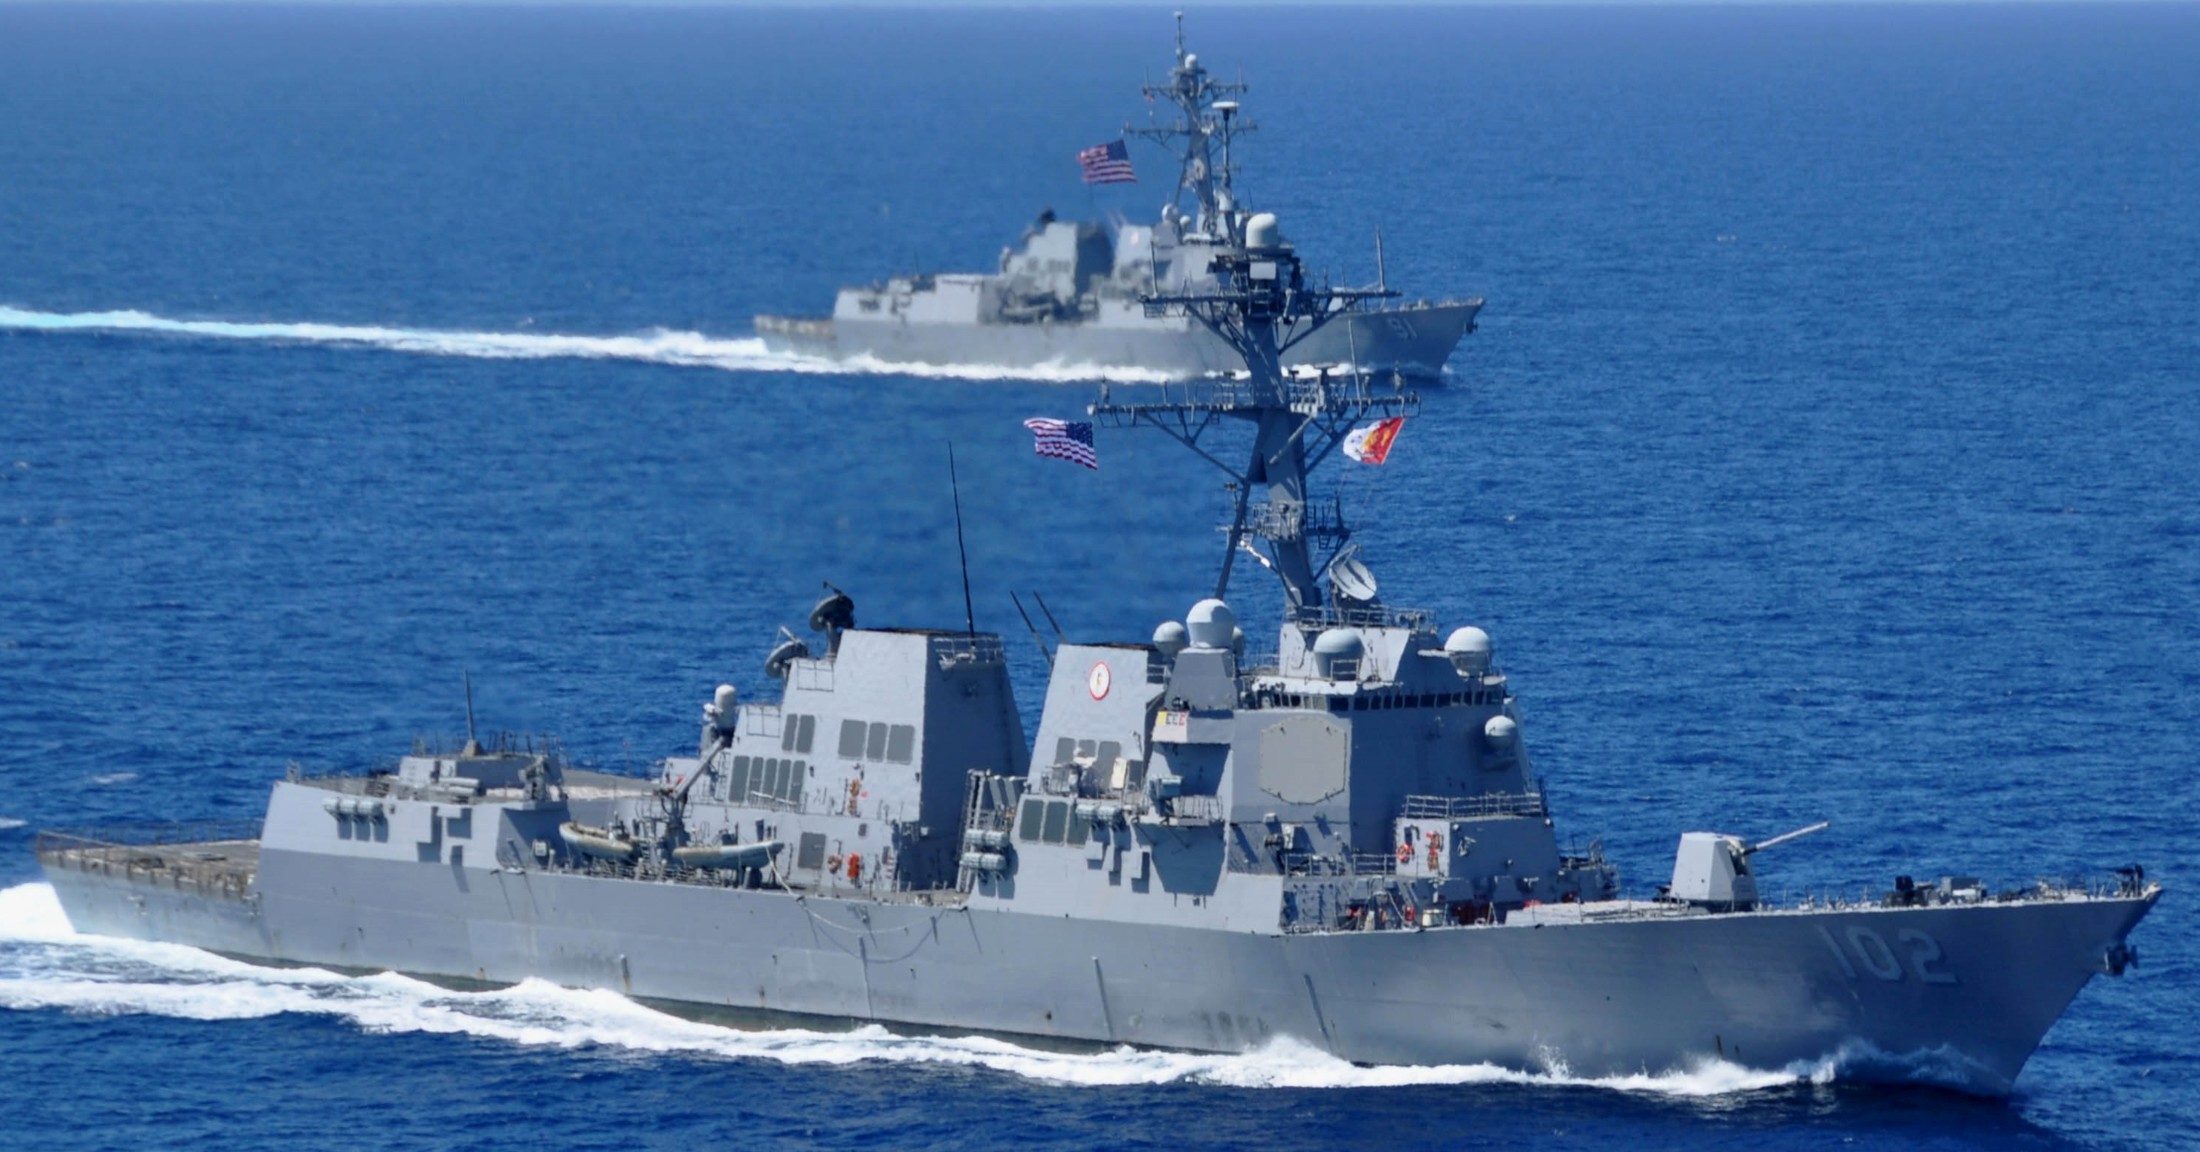 ddg-102 uss sampson arleigh burke class guided missile destroyer aegis us navy south china sea 38